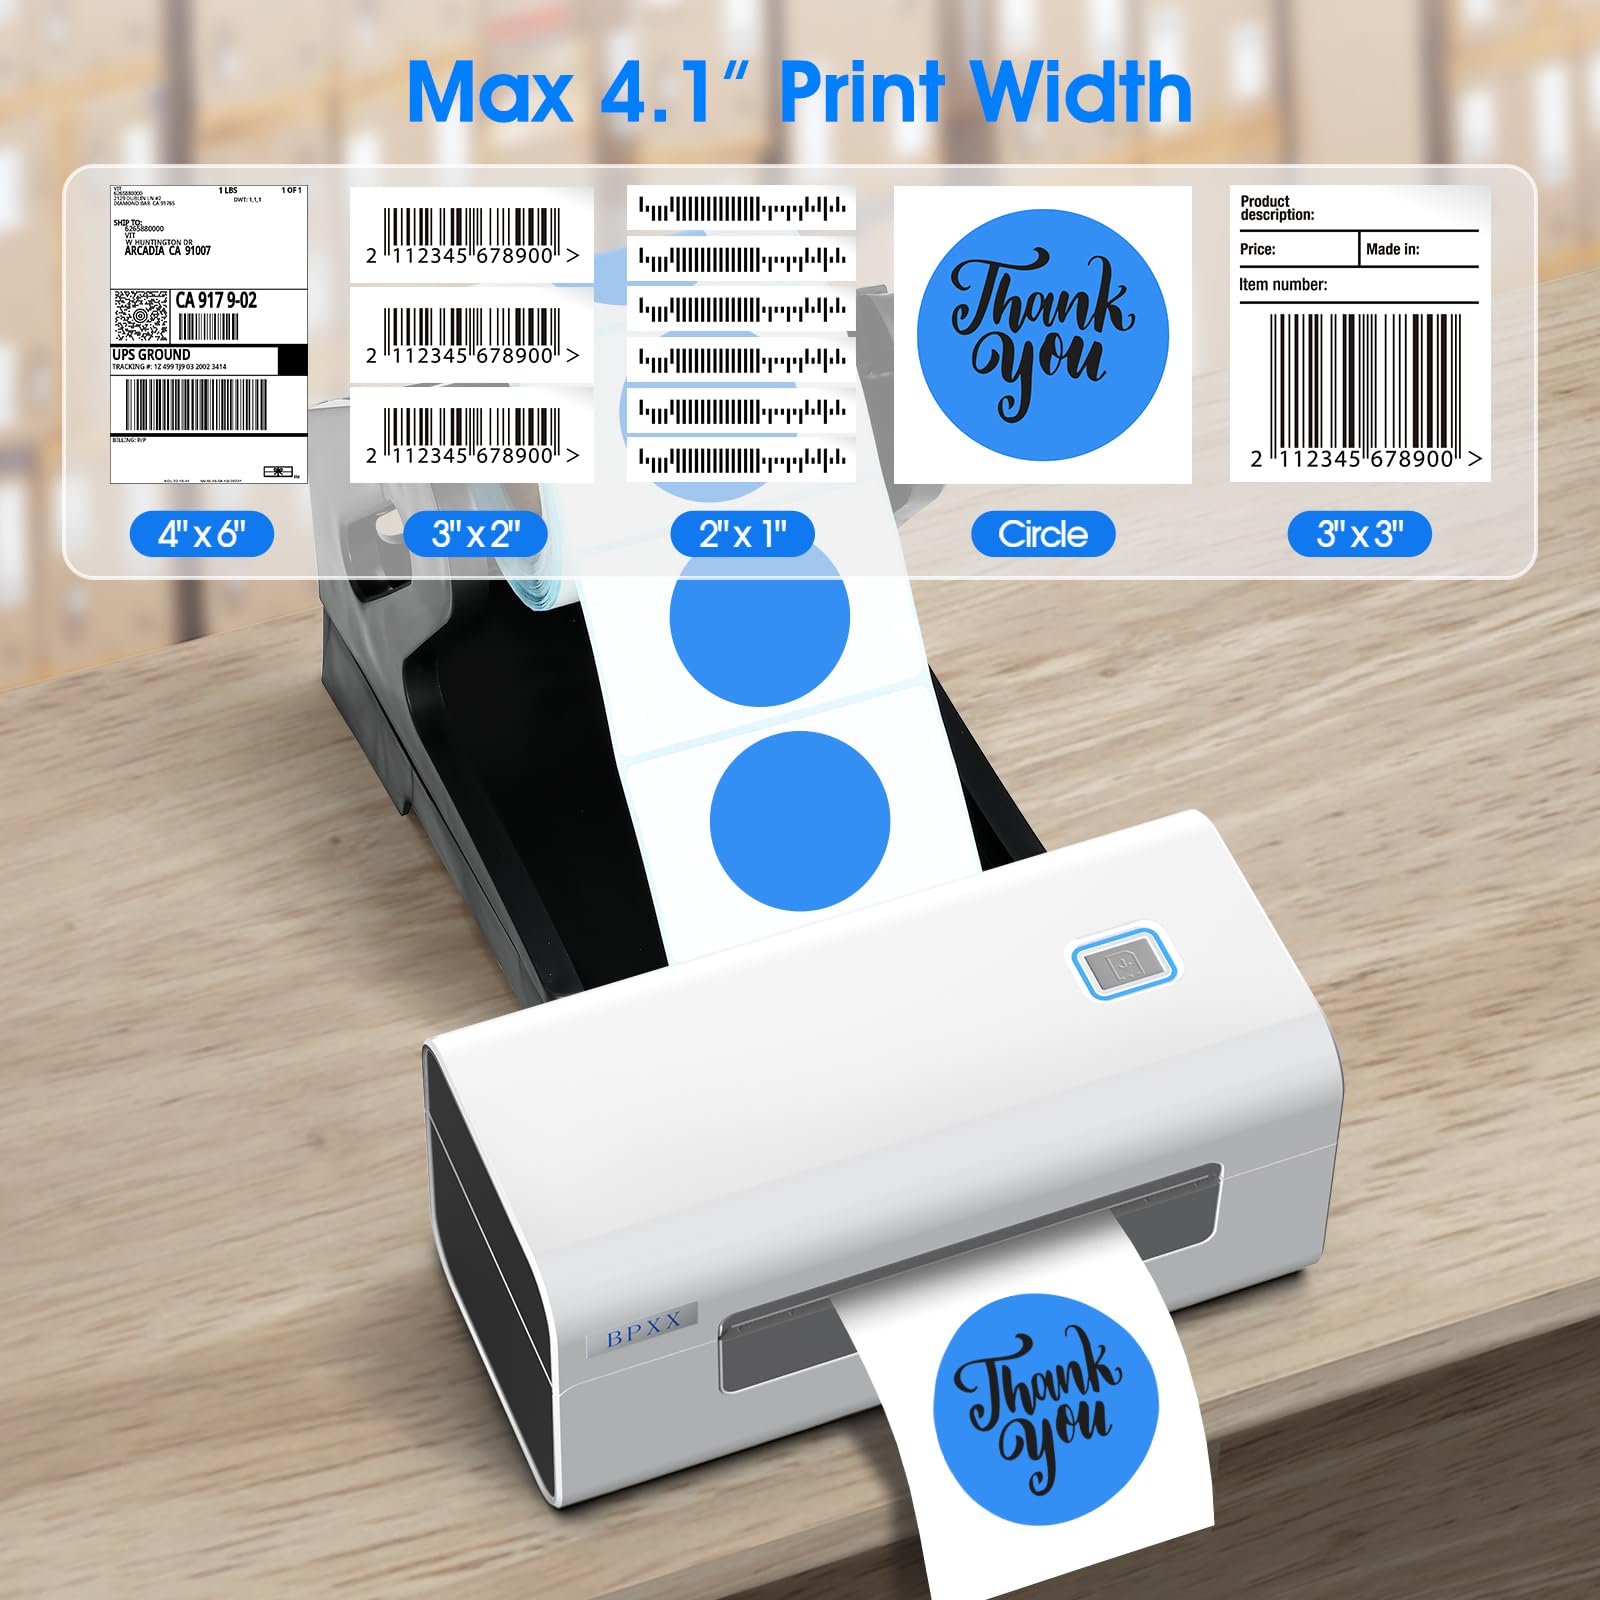 BPXX Bluetooth Thermal Label Printer, Wireless 4×6 Shipping Label Printer for Small Business, Label Printer Support Android/iPhone/Windows, Compatible with Shopify, Ebay, USPS, Amazon, Etsy, D465B